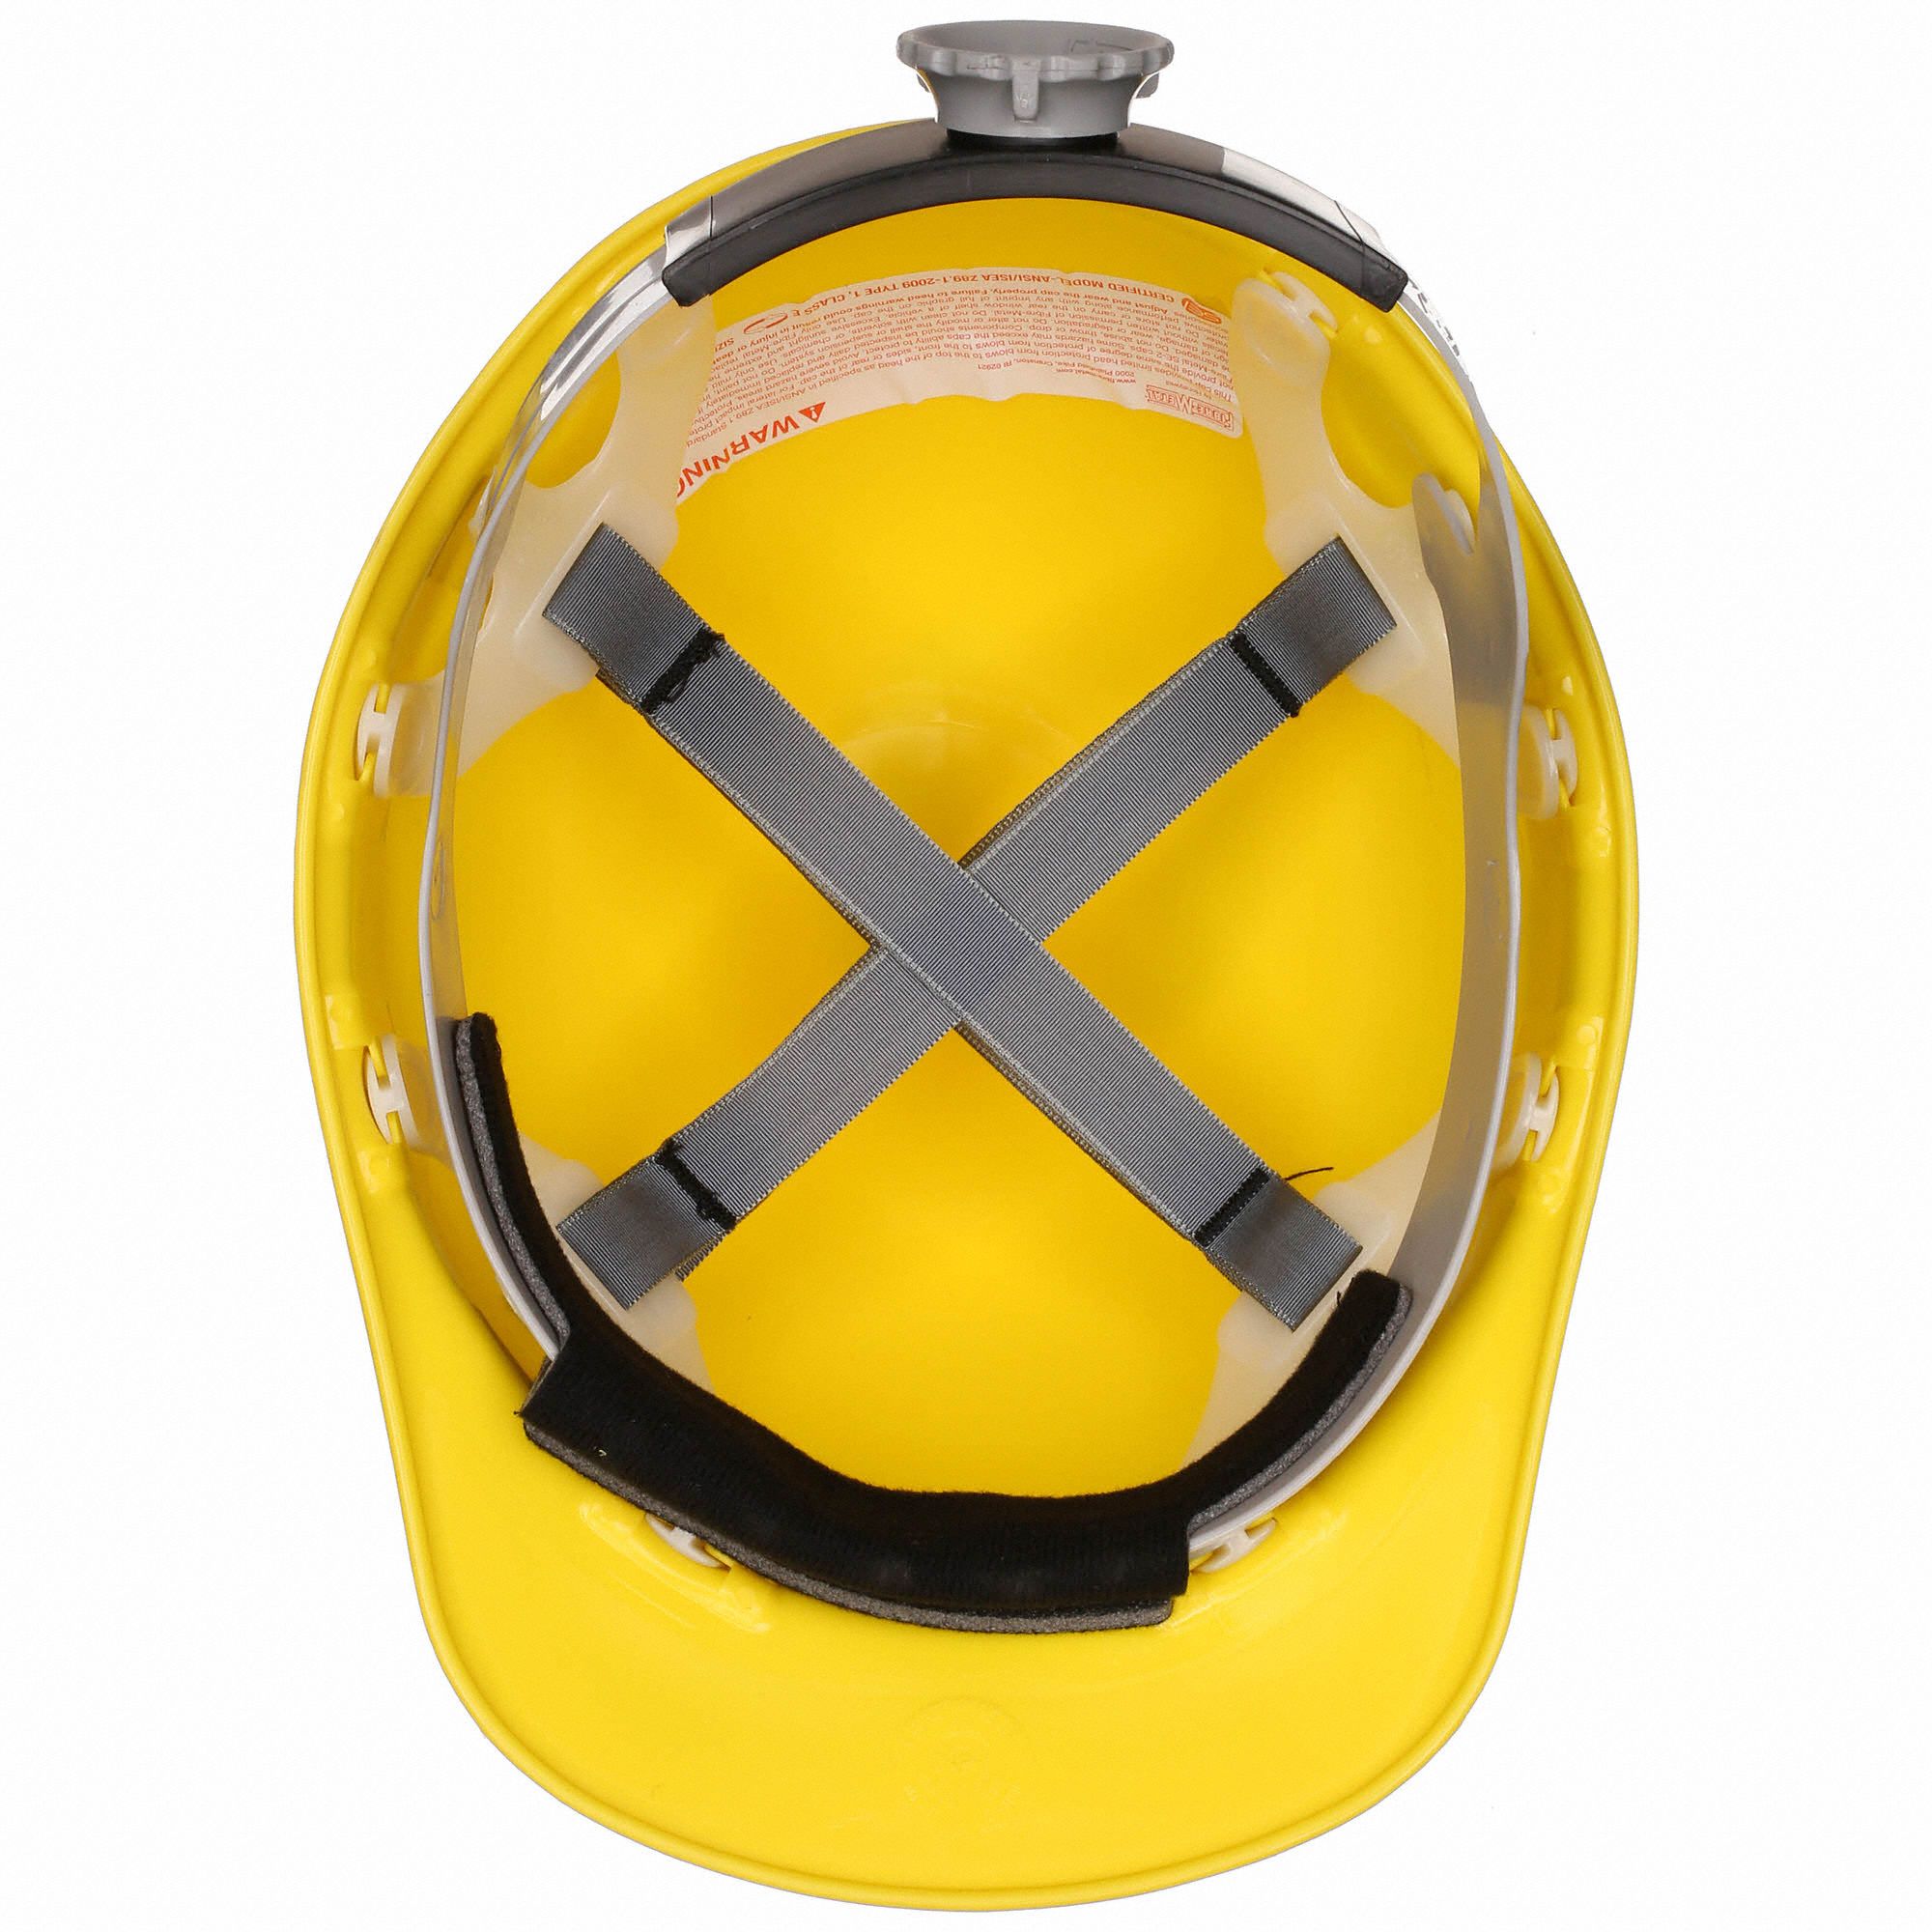 G or C Type I Thermoplastic Hard Hat with 3-S Swingstrap Suspension Plastic Honeywell FIBE2SW02A000 Fibre-Metal Yellow SUPEREIGHT SWINGSTRAP Class E 1 x 1 x 1 1 x 1 x 1 